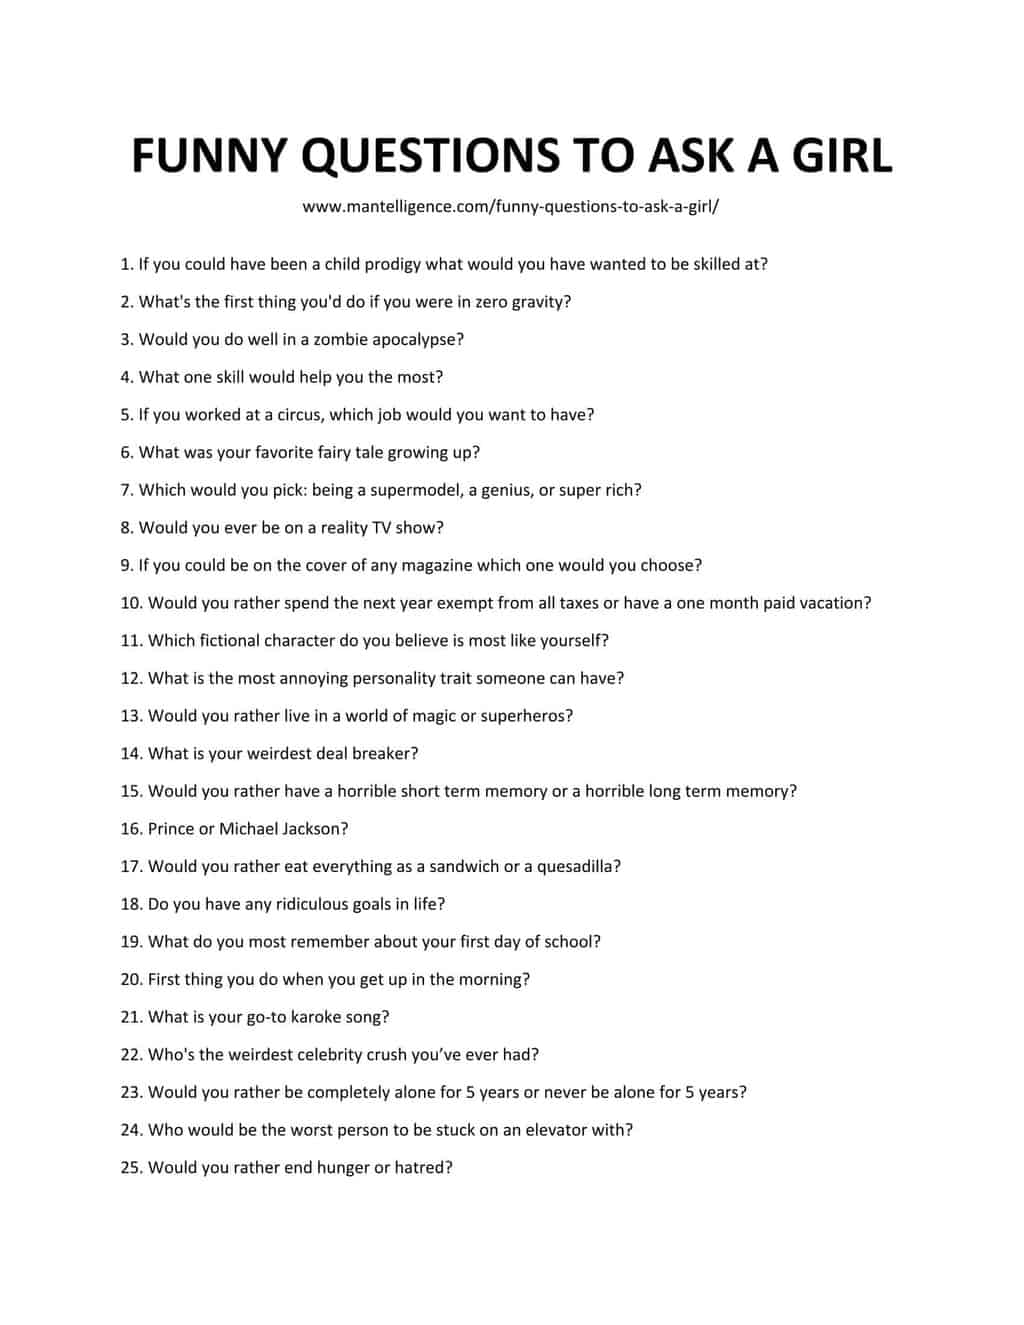 FUNNY QUESTIONS TO ASK A GIRL ON WHATSAPP – wuwuhodek6